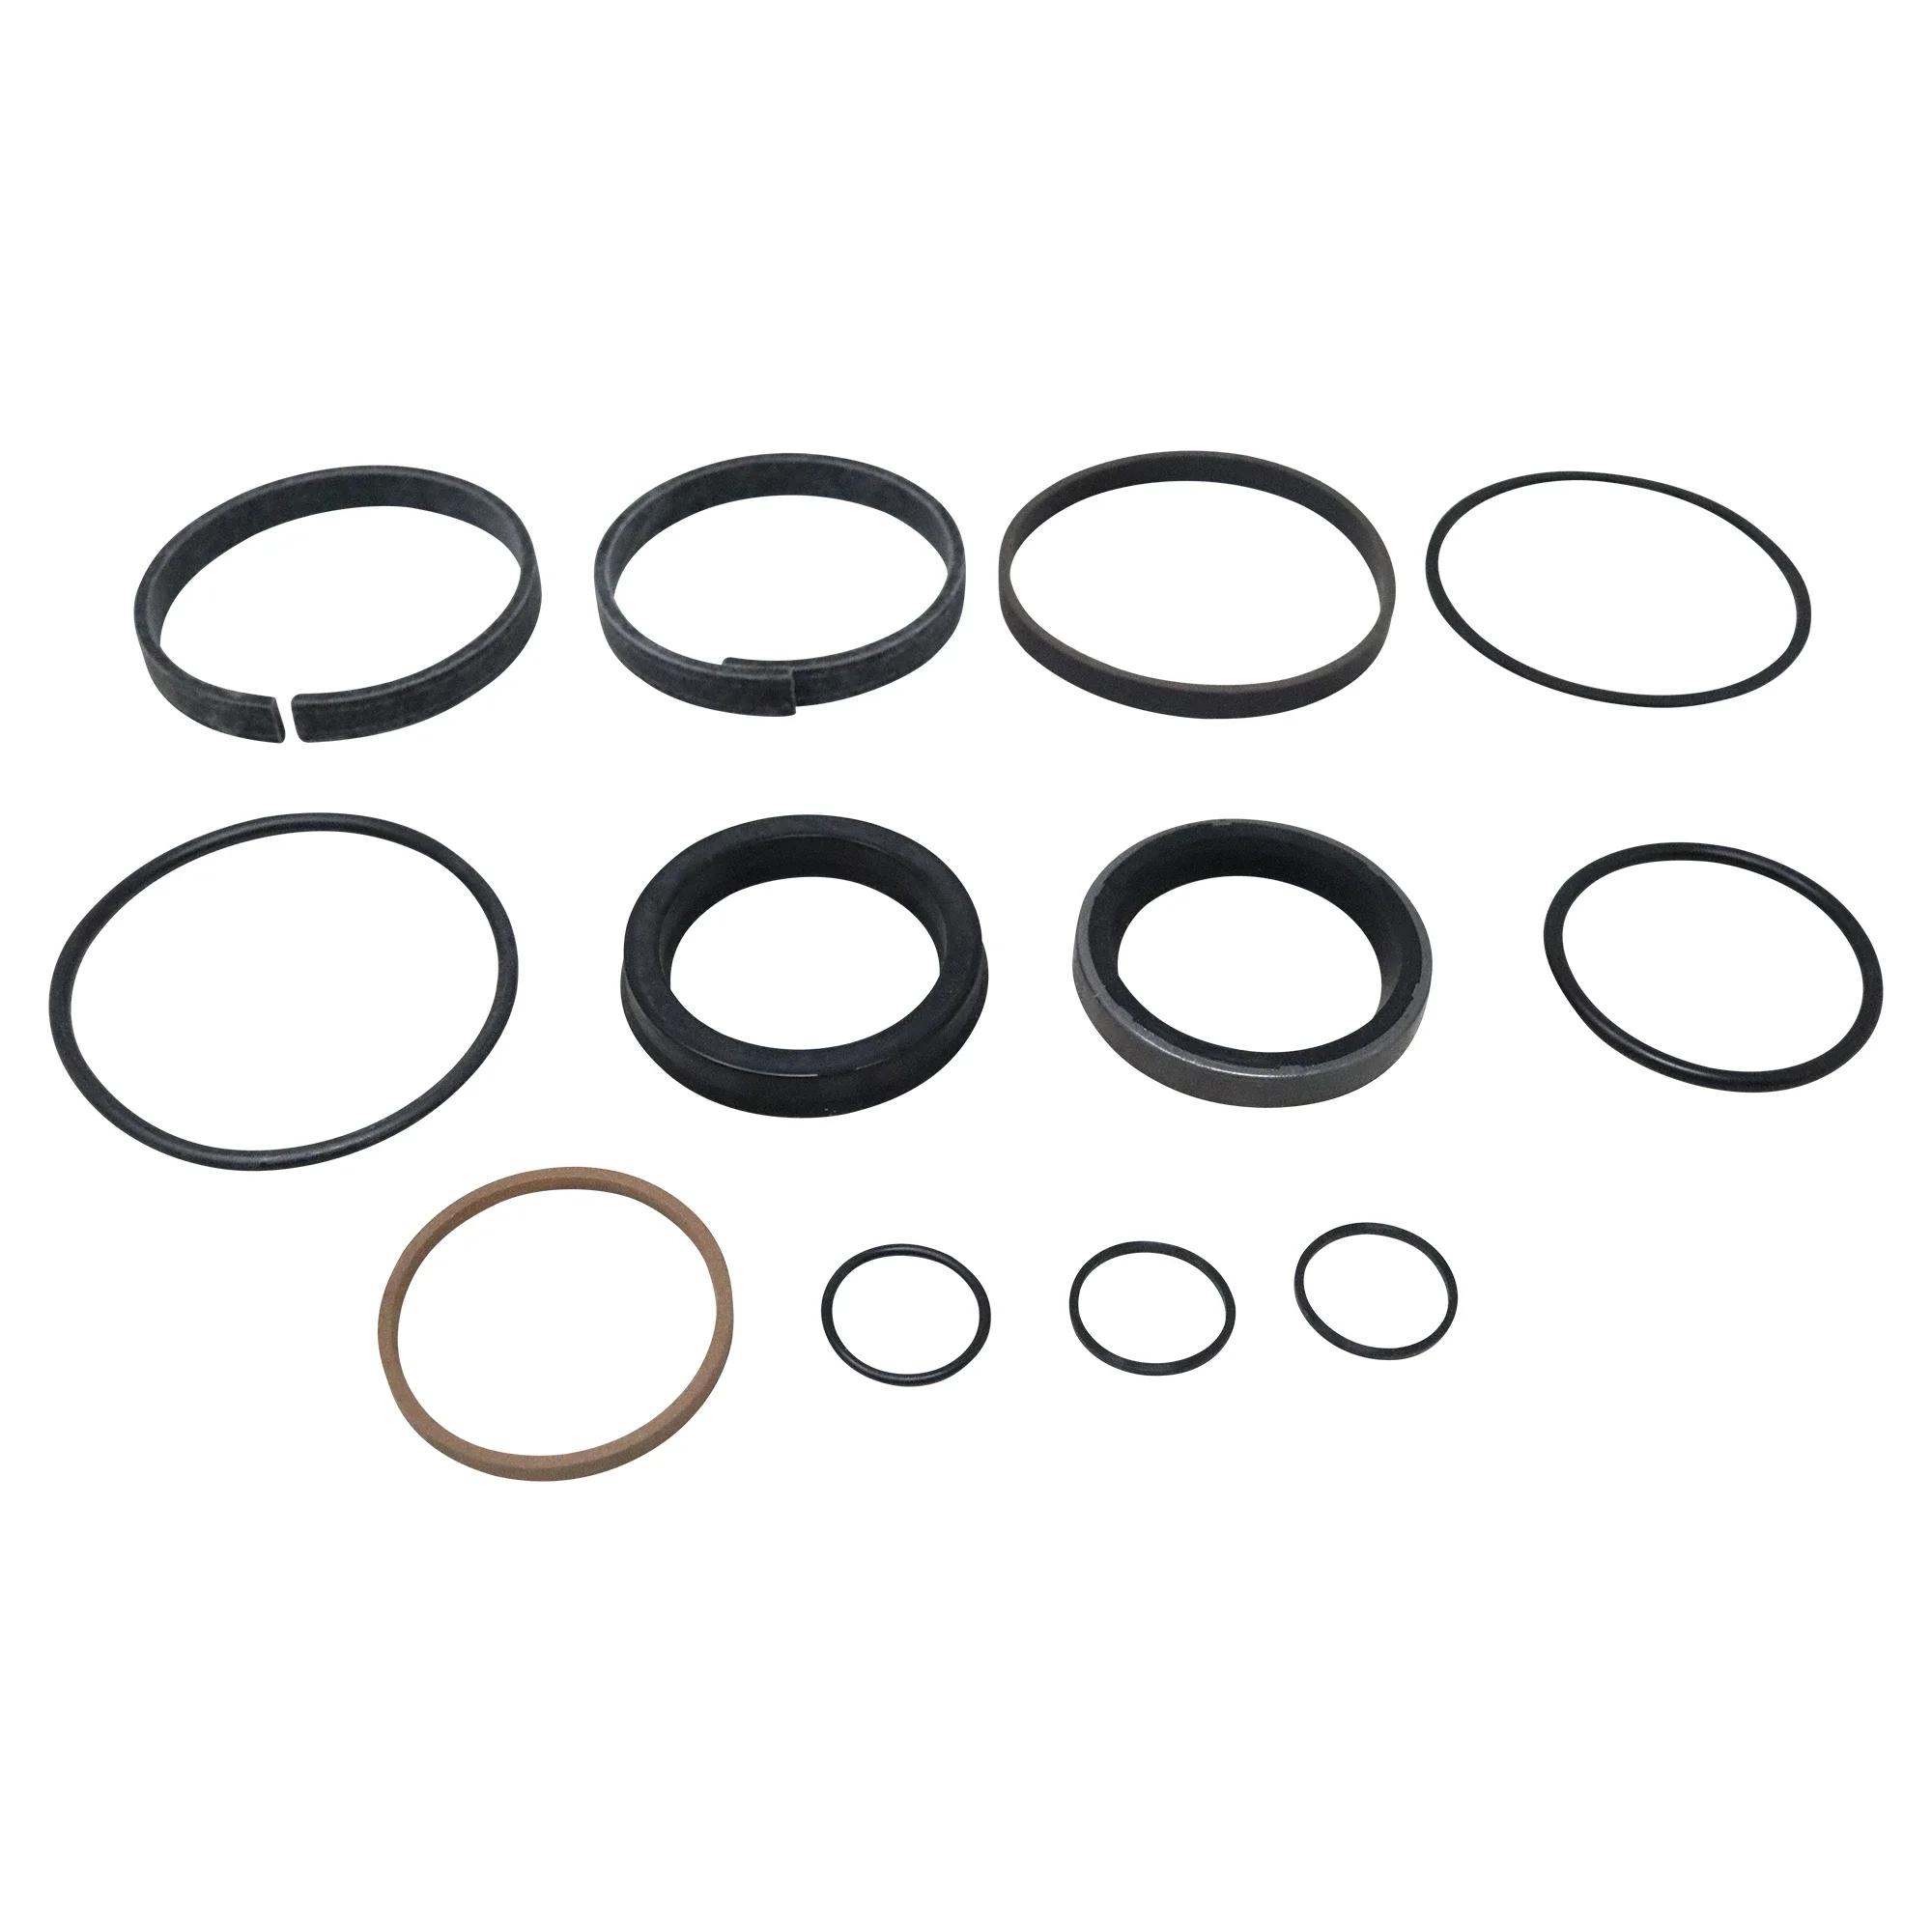 Wastebuilt® Replacement for Heil Seal Kit 1/2 Pack  (001-5088)